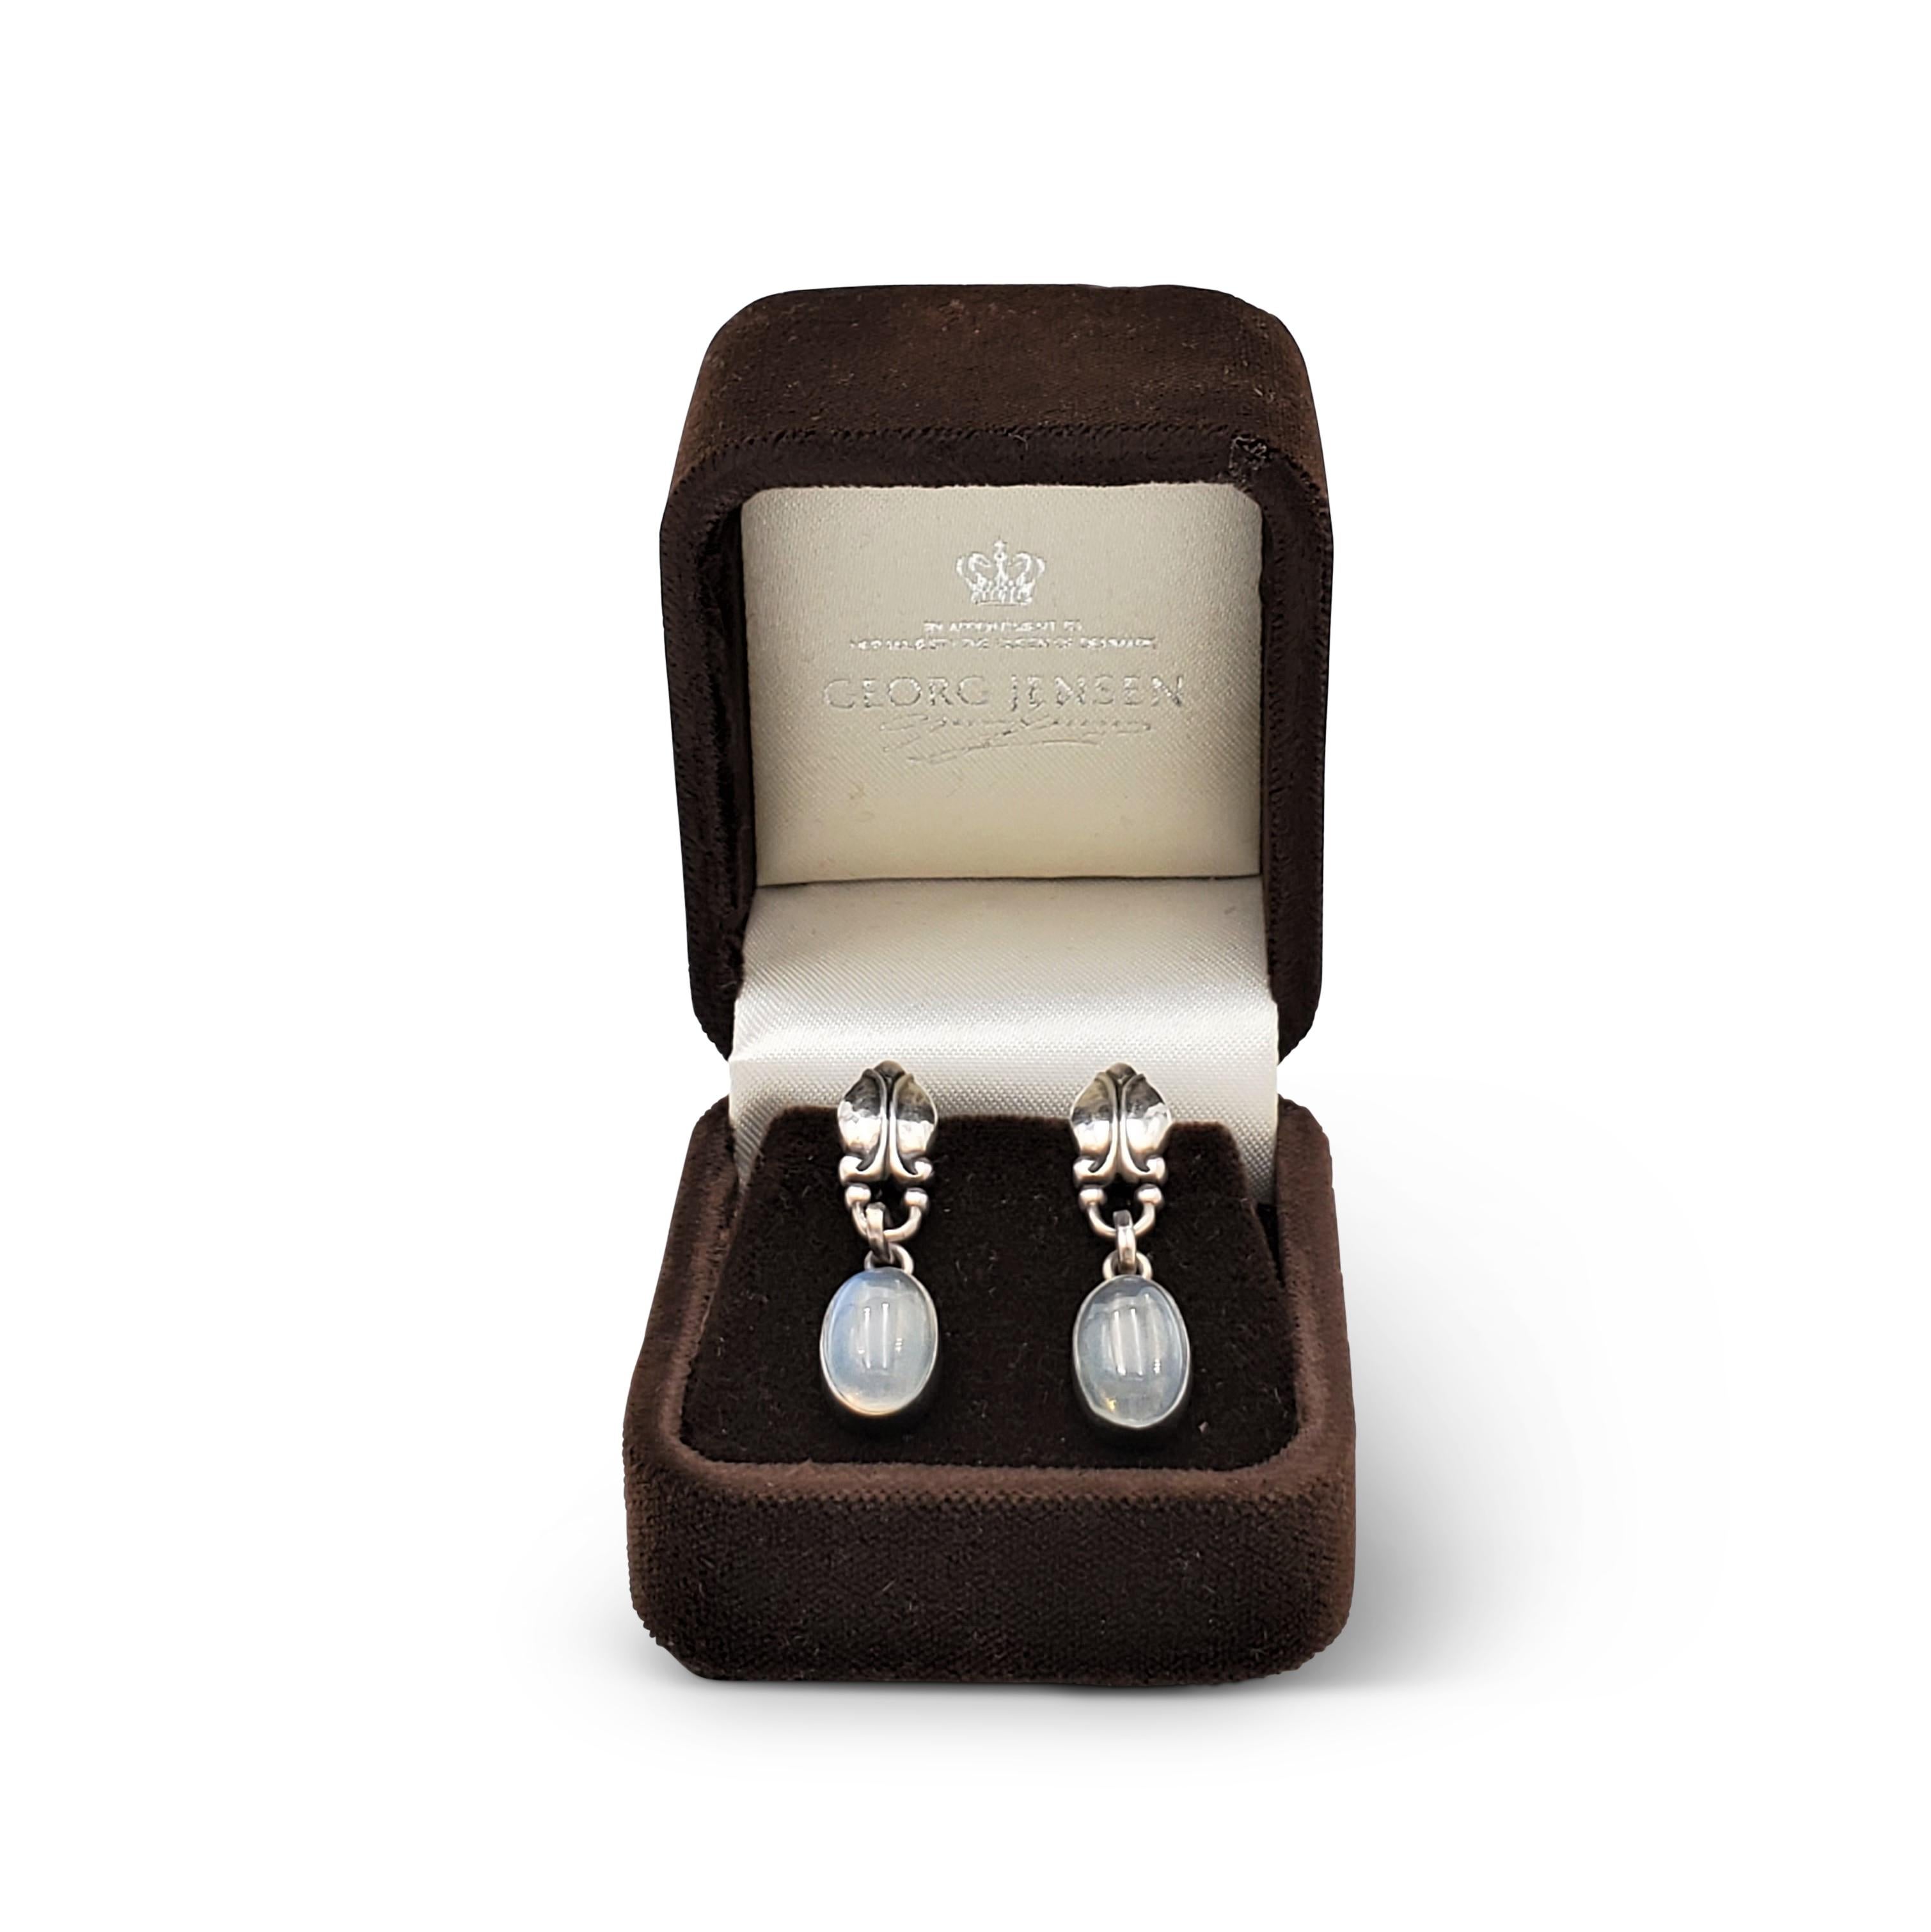 Authentic vintage Georg Jensen sterling silver earrings featuring moonstone drops. Signed Georg Jensen, 925 S, Denmark, 17. The earrings are presented with the original box, no papers. CIRCA 1960s.